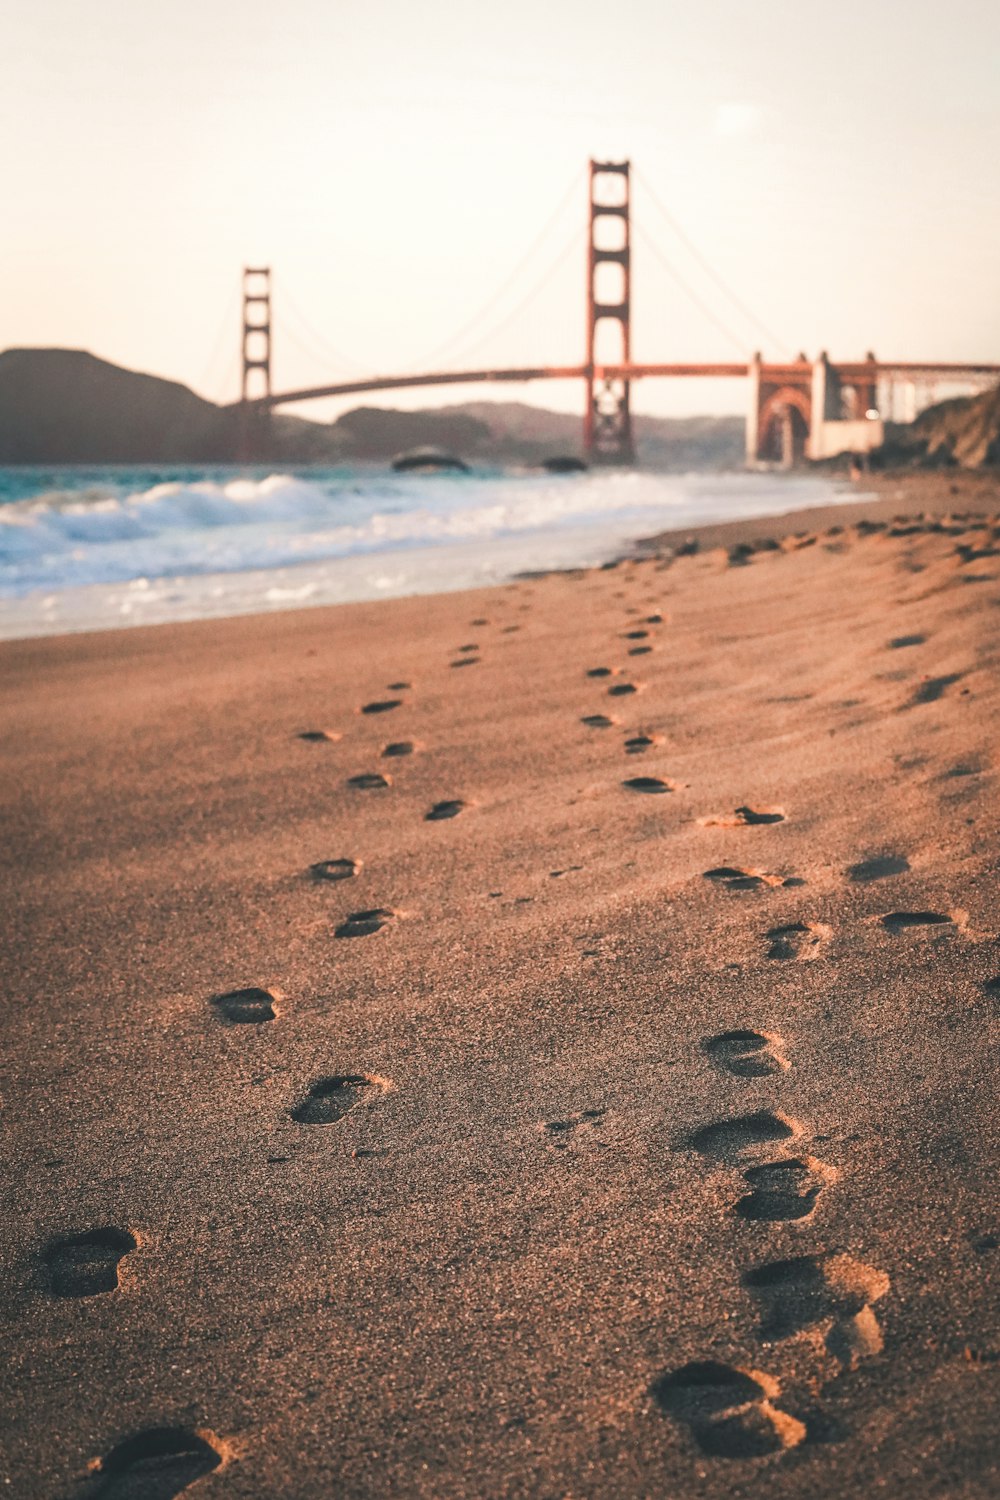 Footprints in the sand with the Golden Gate bridge in the background in San Francisco